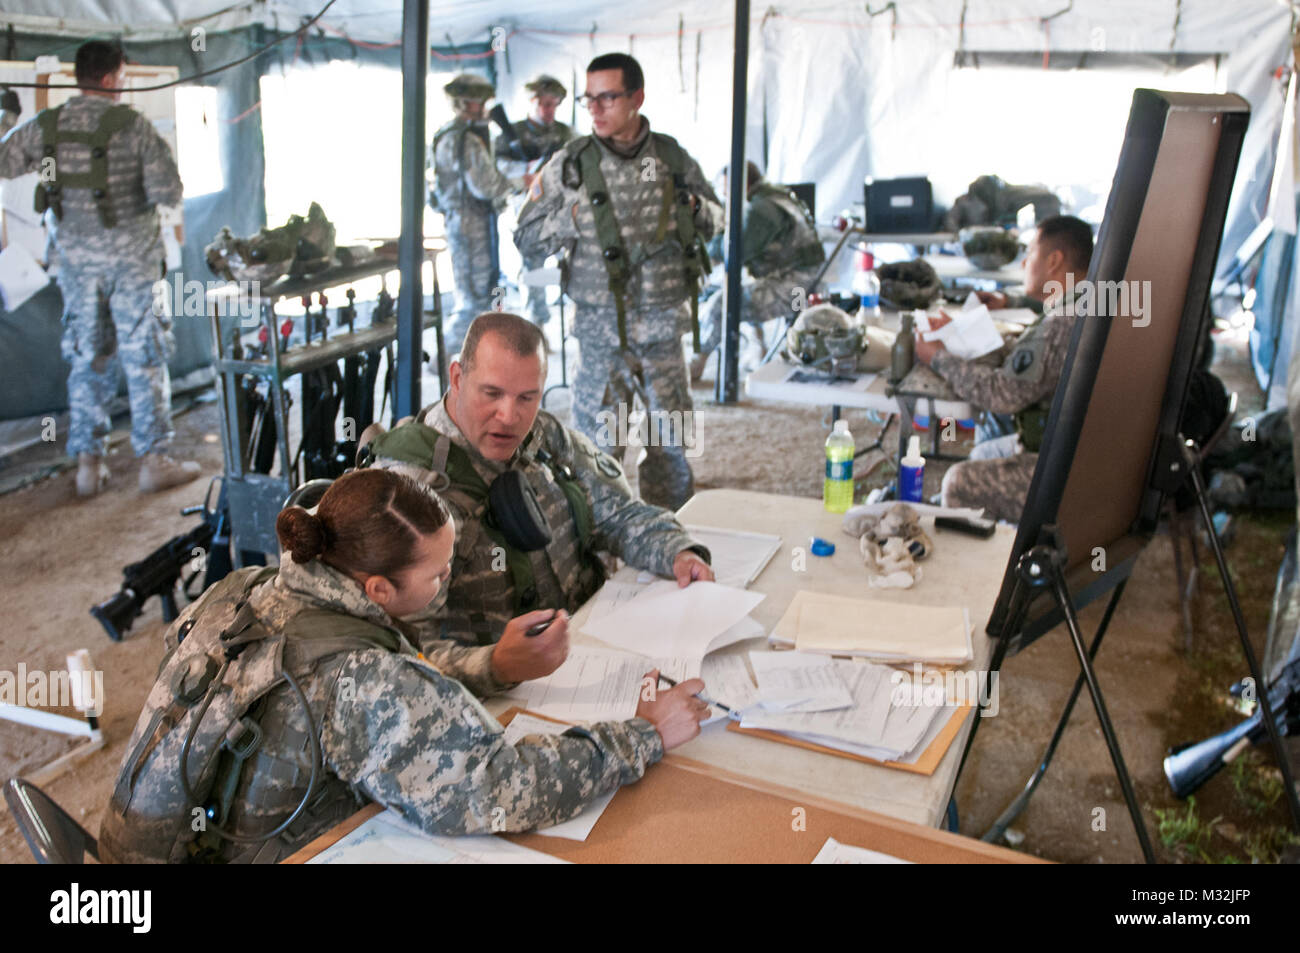 Staff Sgt. Carlos Diaz and Spc. Charlene Suliz, construction engineers with the 475th Engineer Company (Horizontal), an Army Reserve unit from Puerto Rico, review the day's plans during Combat Support Training Exercise 78-16-01 at Fort Hunter Liggett, Cali., March 08, 2016. CSTX 78-16-01 is a U.S. Army Reserve exercise conducted at multiple locations across the country designed to challenge combat support units and Soldiers to improve and sustain skills necessary during a deployment. (U.S. Army photo by Staff Sgt. Dalton Smith/Released) 160308-A-BG398-001 by 316th ESC Stock Photo